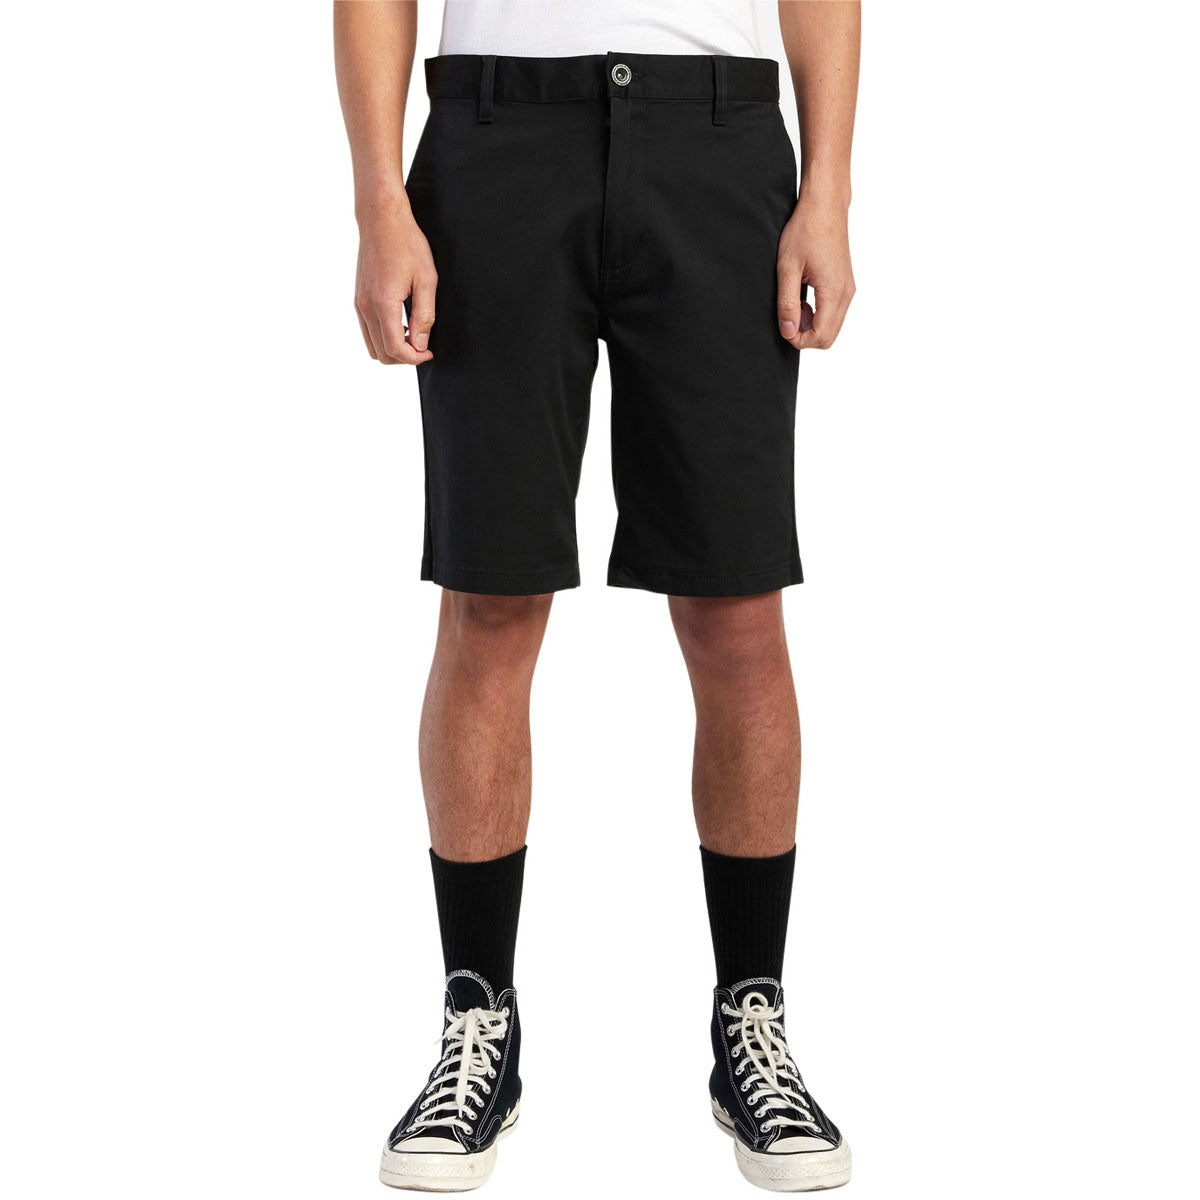 RVCA The Weekend Stretch Shorts - Black image 2